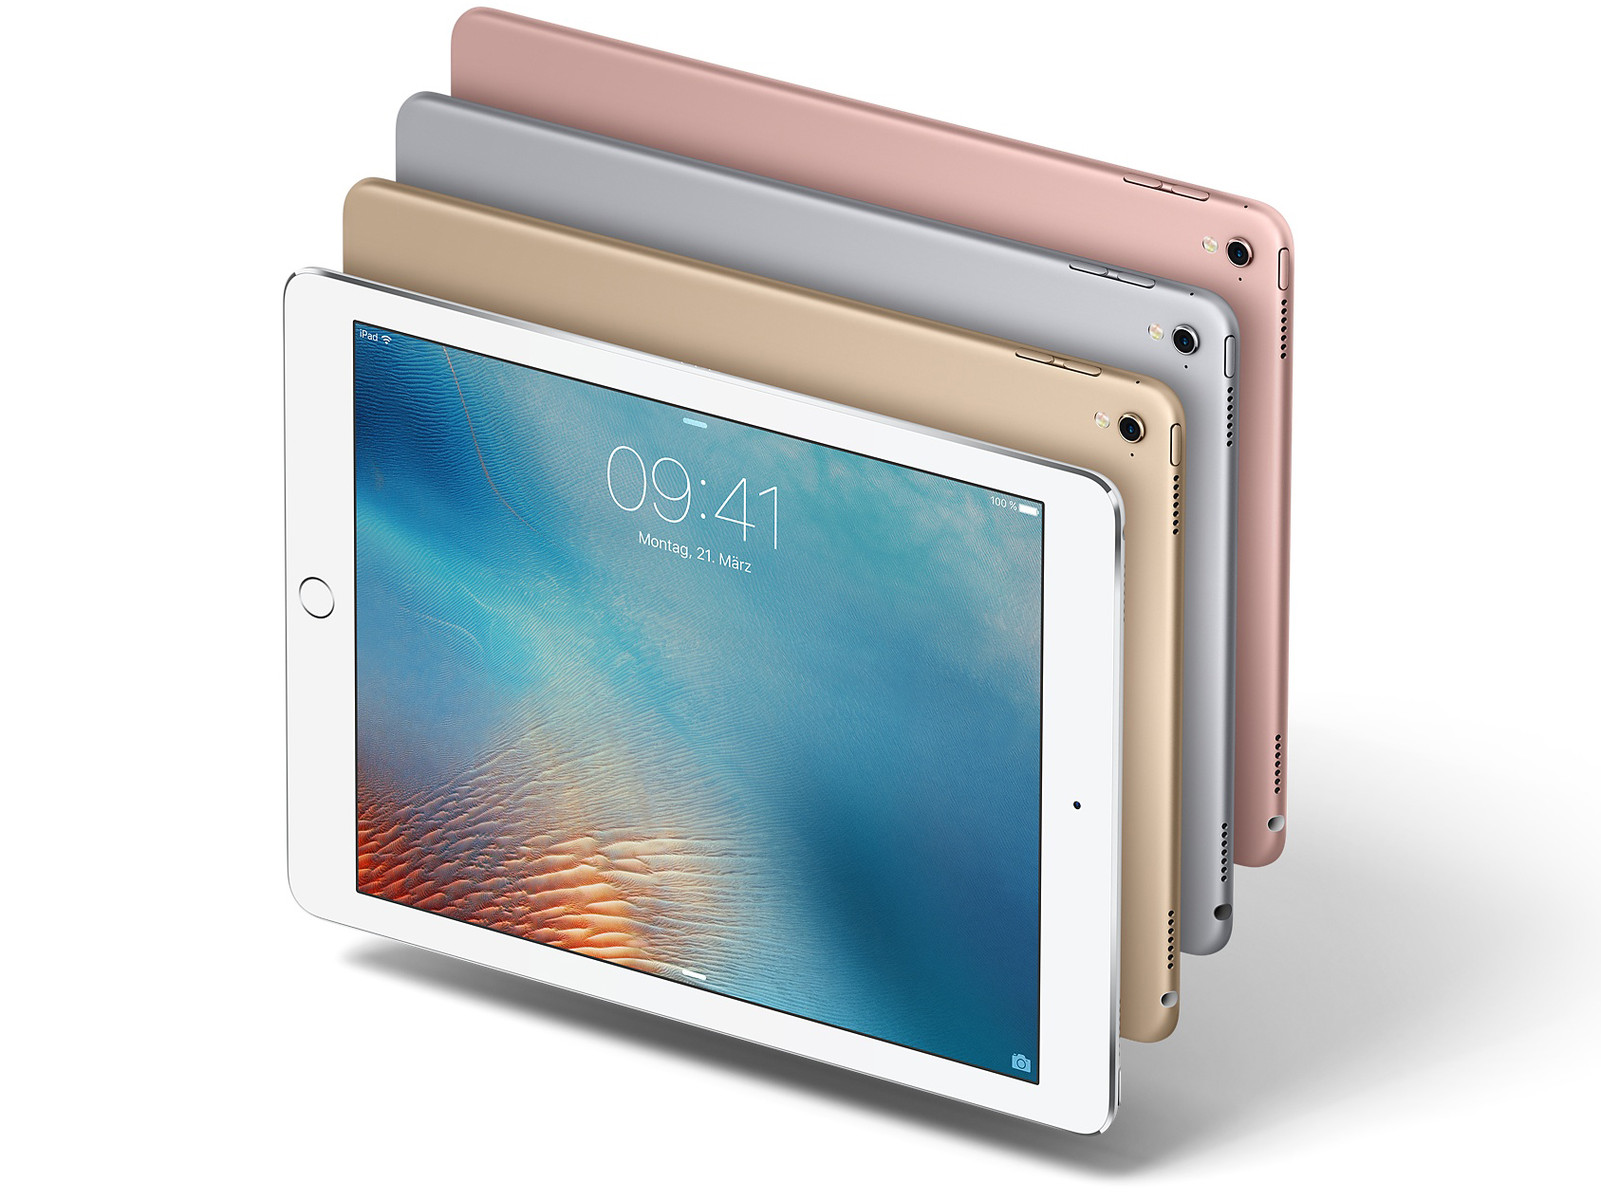 Apple is officially selling refurbished iPad Pro models on its store with attractive prices